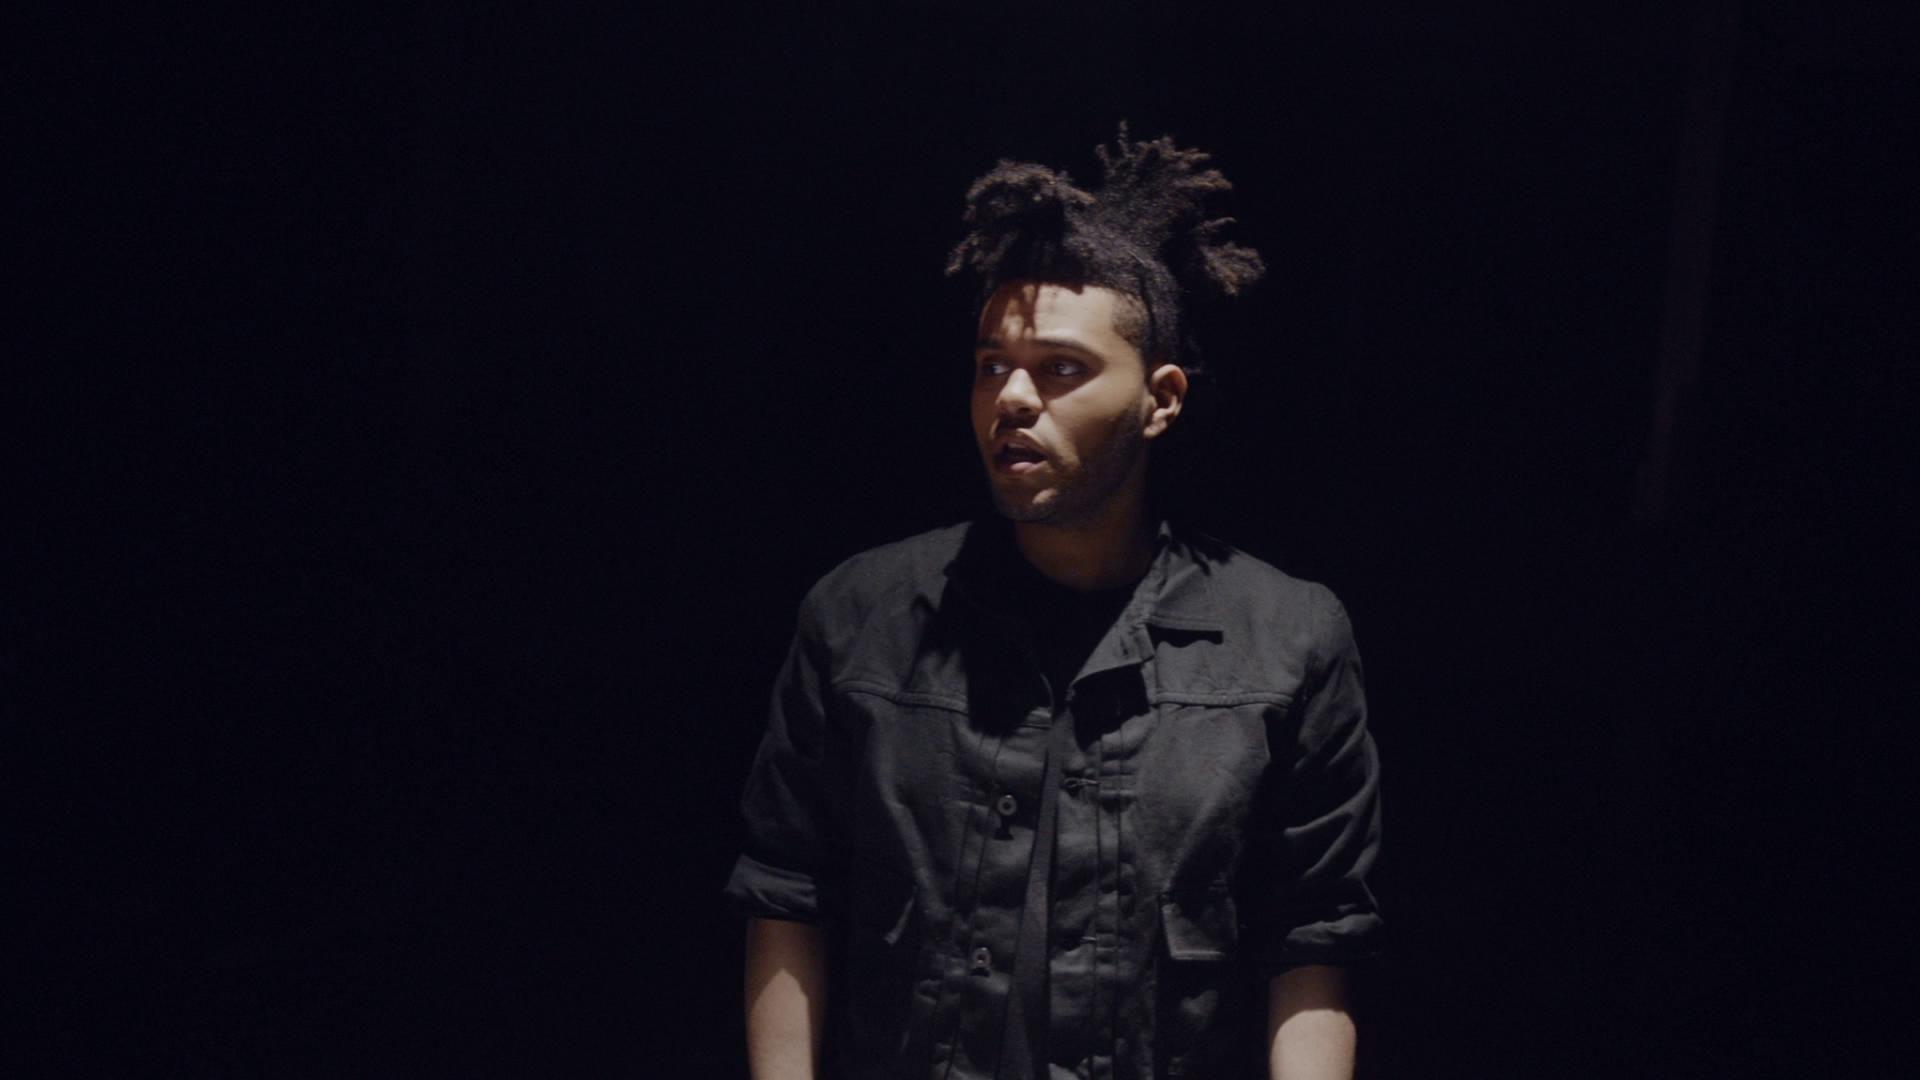 Best The Weeknd Wallpaper, Wide HQFX Pics Collection